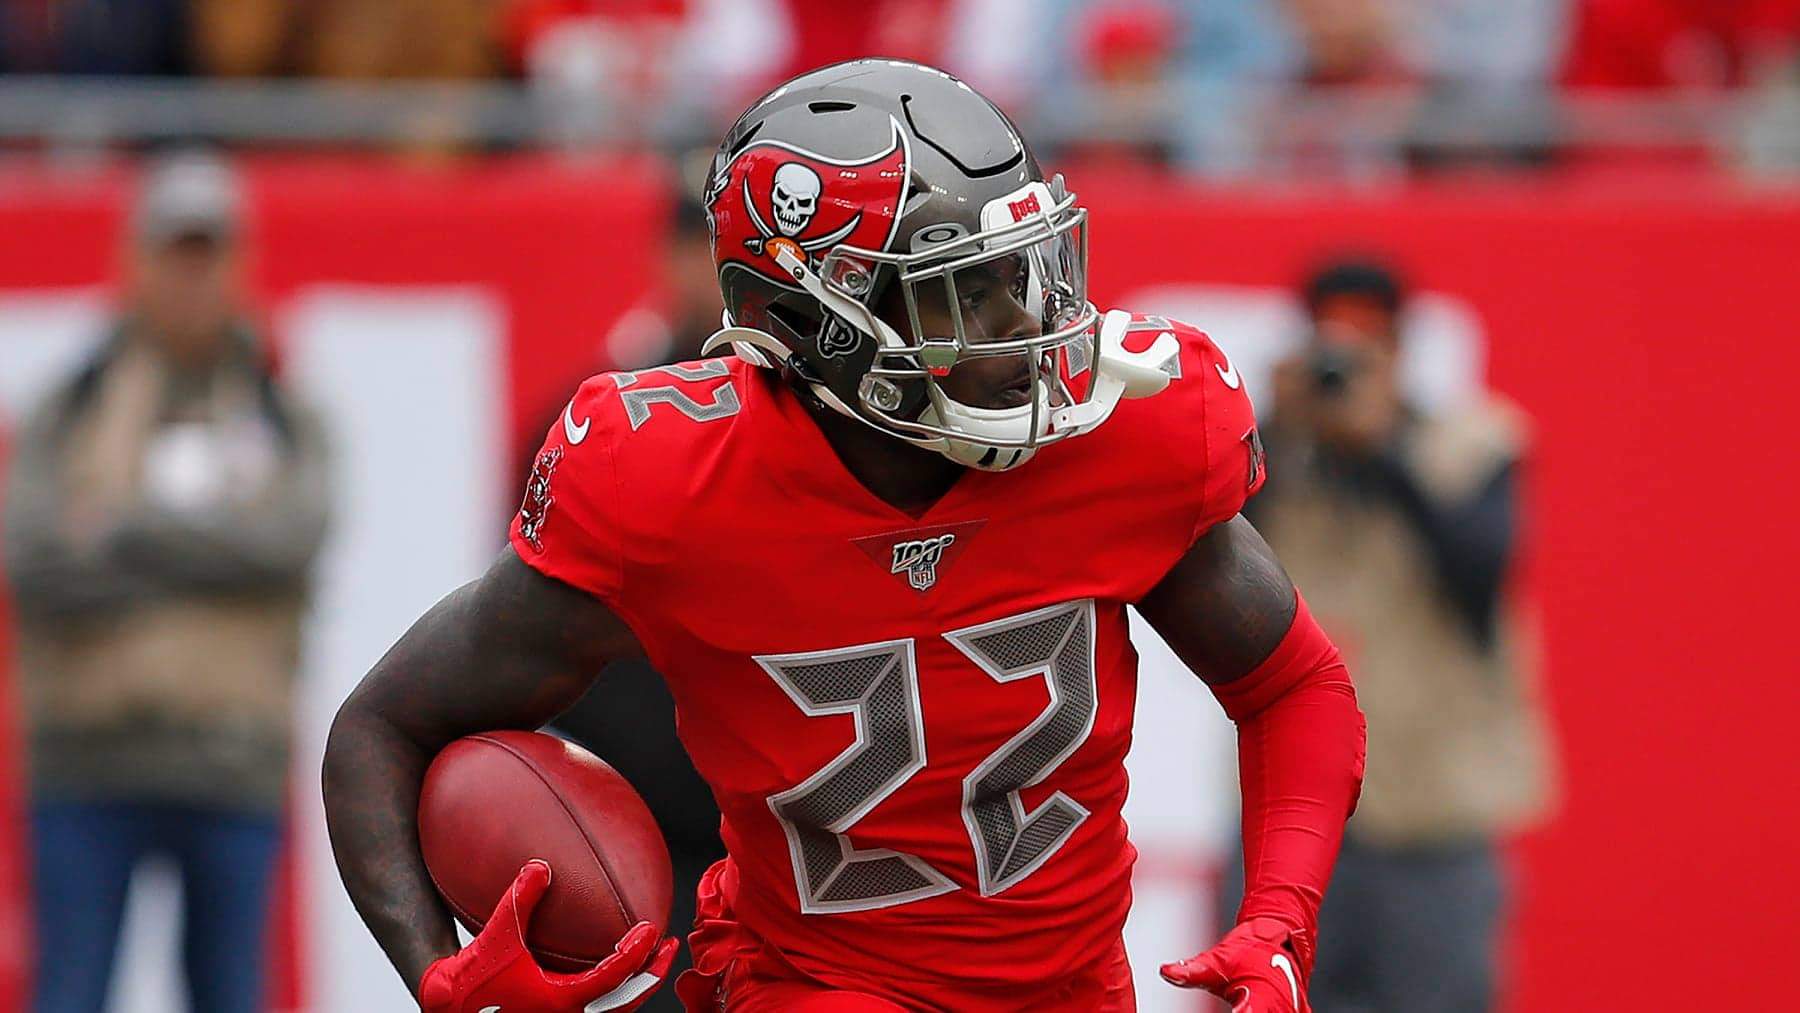 Tampa Bay Buccaneers running back T.J. Logan (22) runs against the New Orleans Saints during the first half of an NFL football game Sunday, Nov. 17, 2019, in Tampa, Fla. (AP Photo/Mark LoMoglio) [MARK LOMOGLIO | AP]